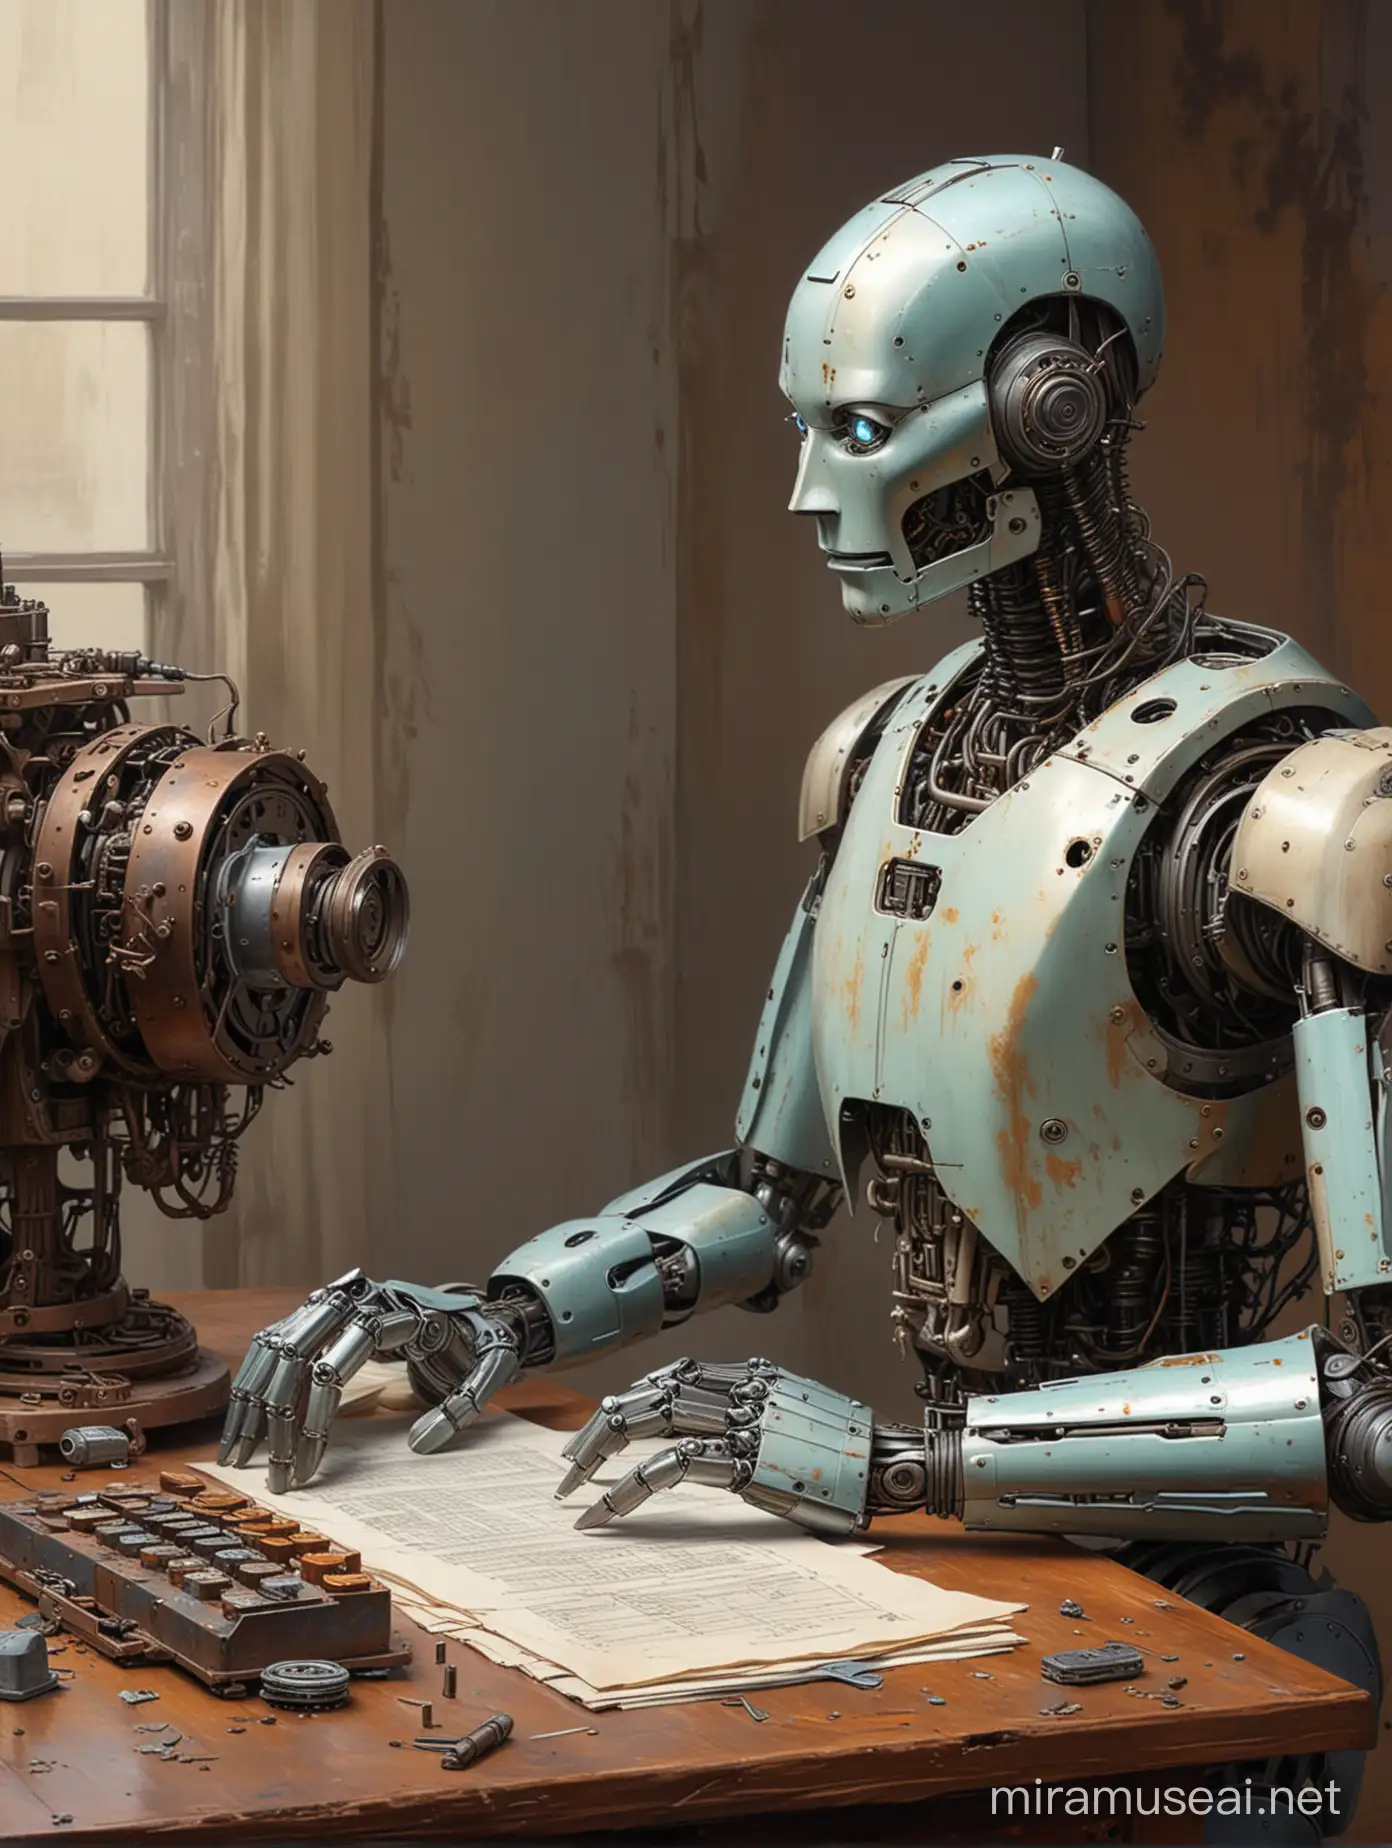 Highly detailed painting, a smooth metal humanoid robot sits at a desk and stares at a rusty antique Calculating machine, use muted pastel colors only, high quality